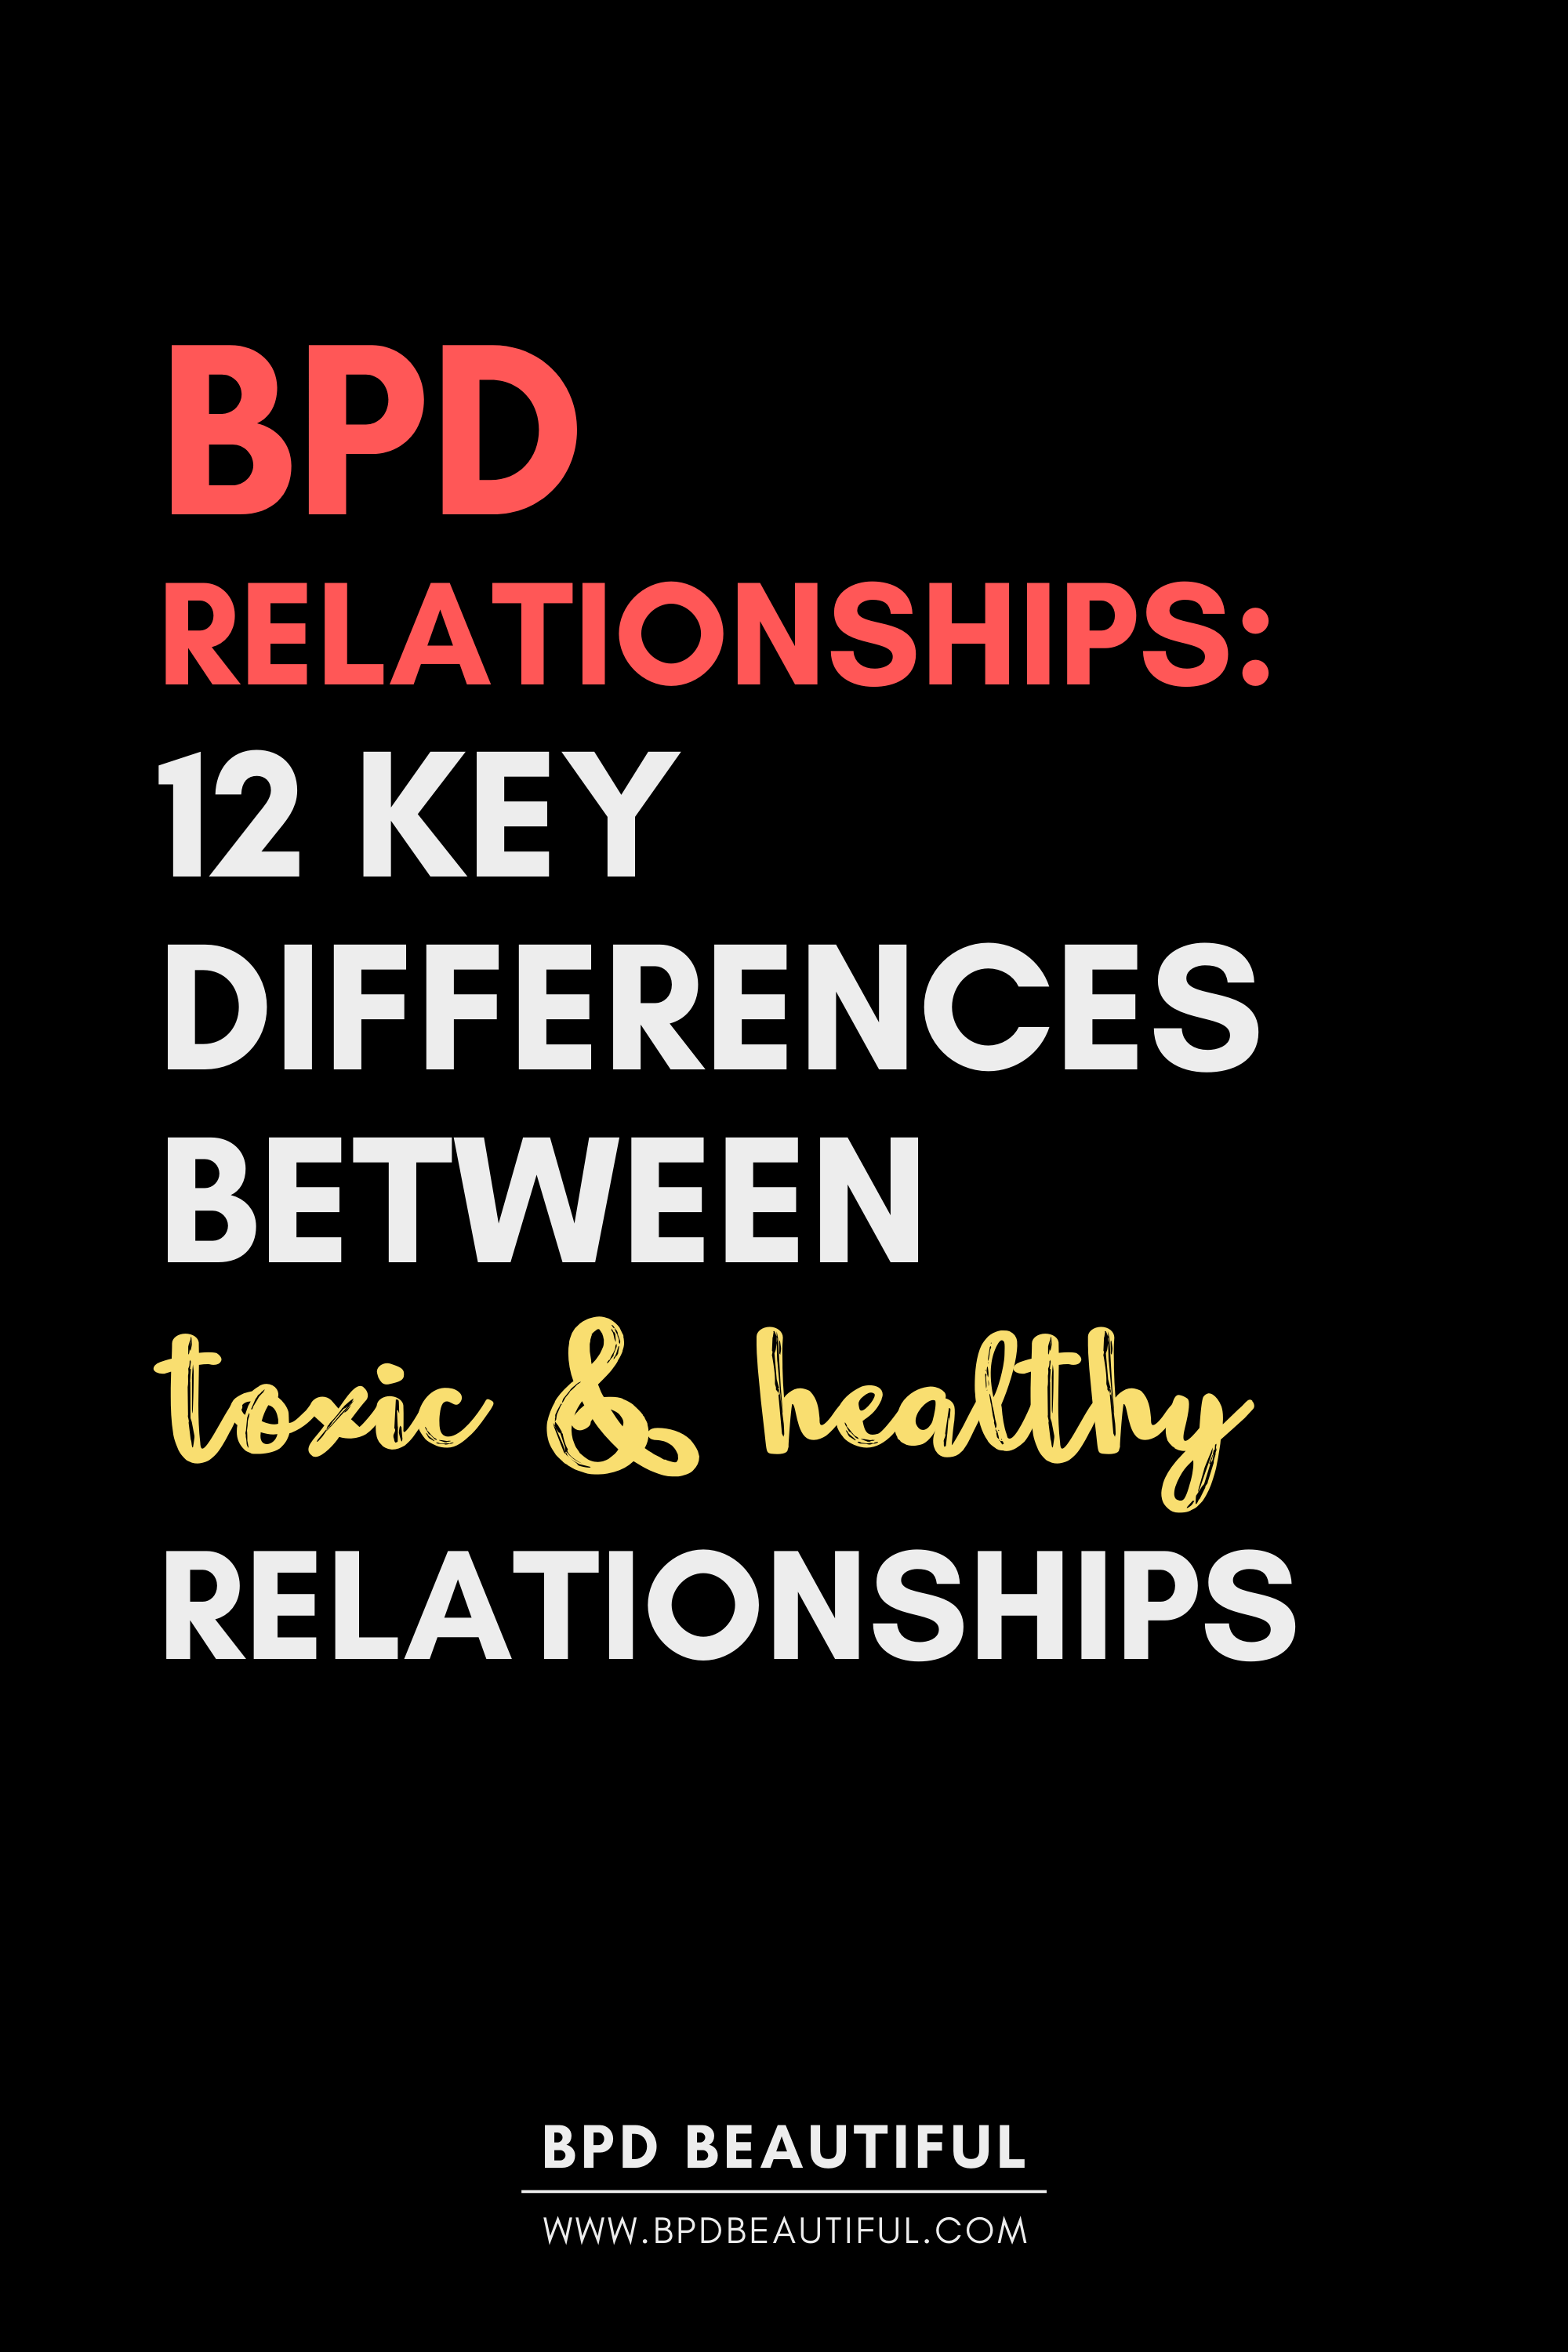 bpd relationships 12 key differences between toxic and healthy relationships borderline personality disorder relationships